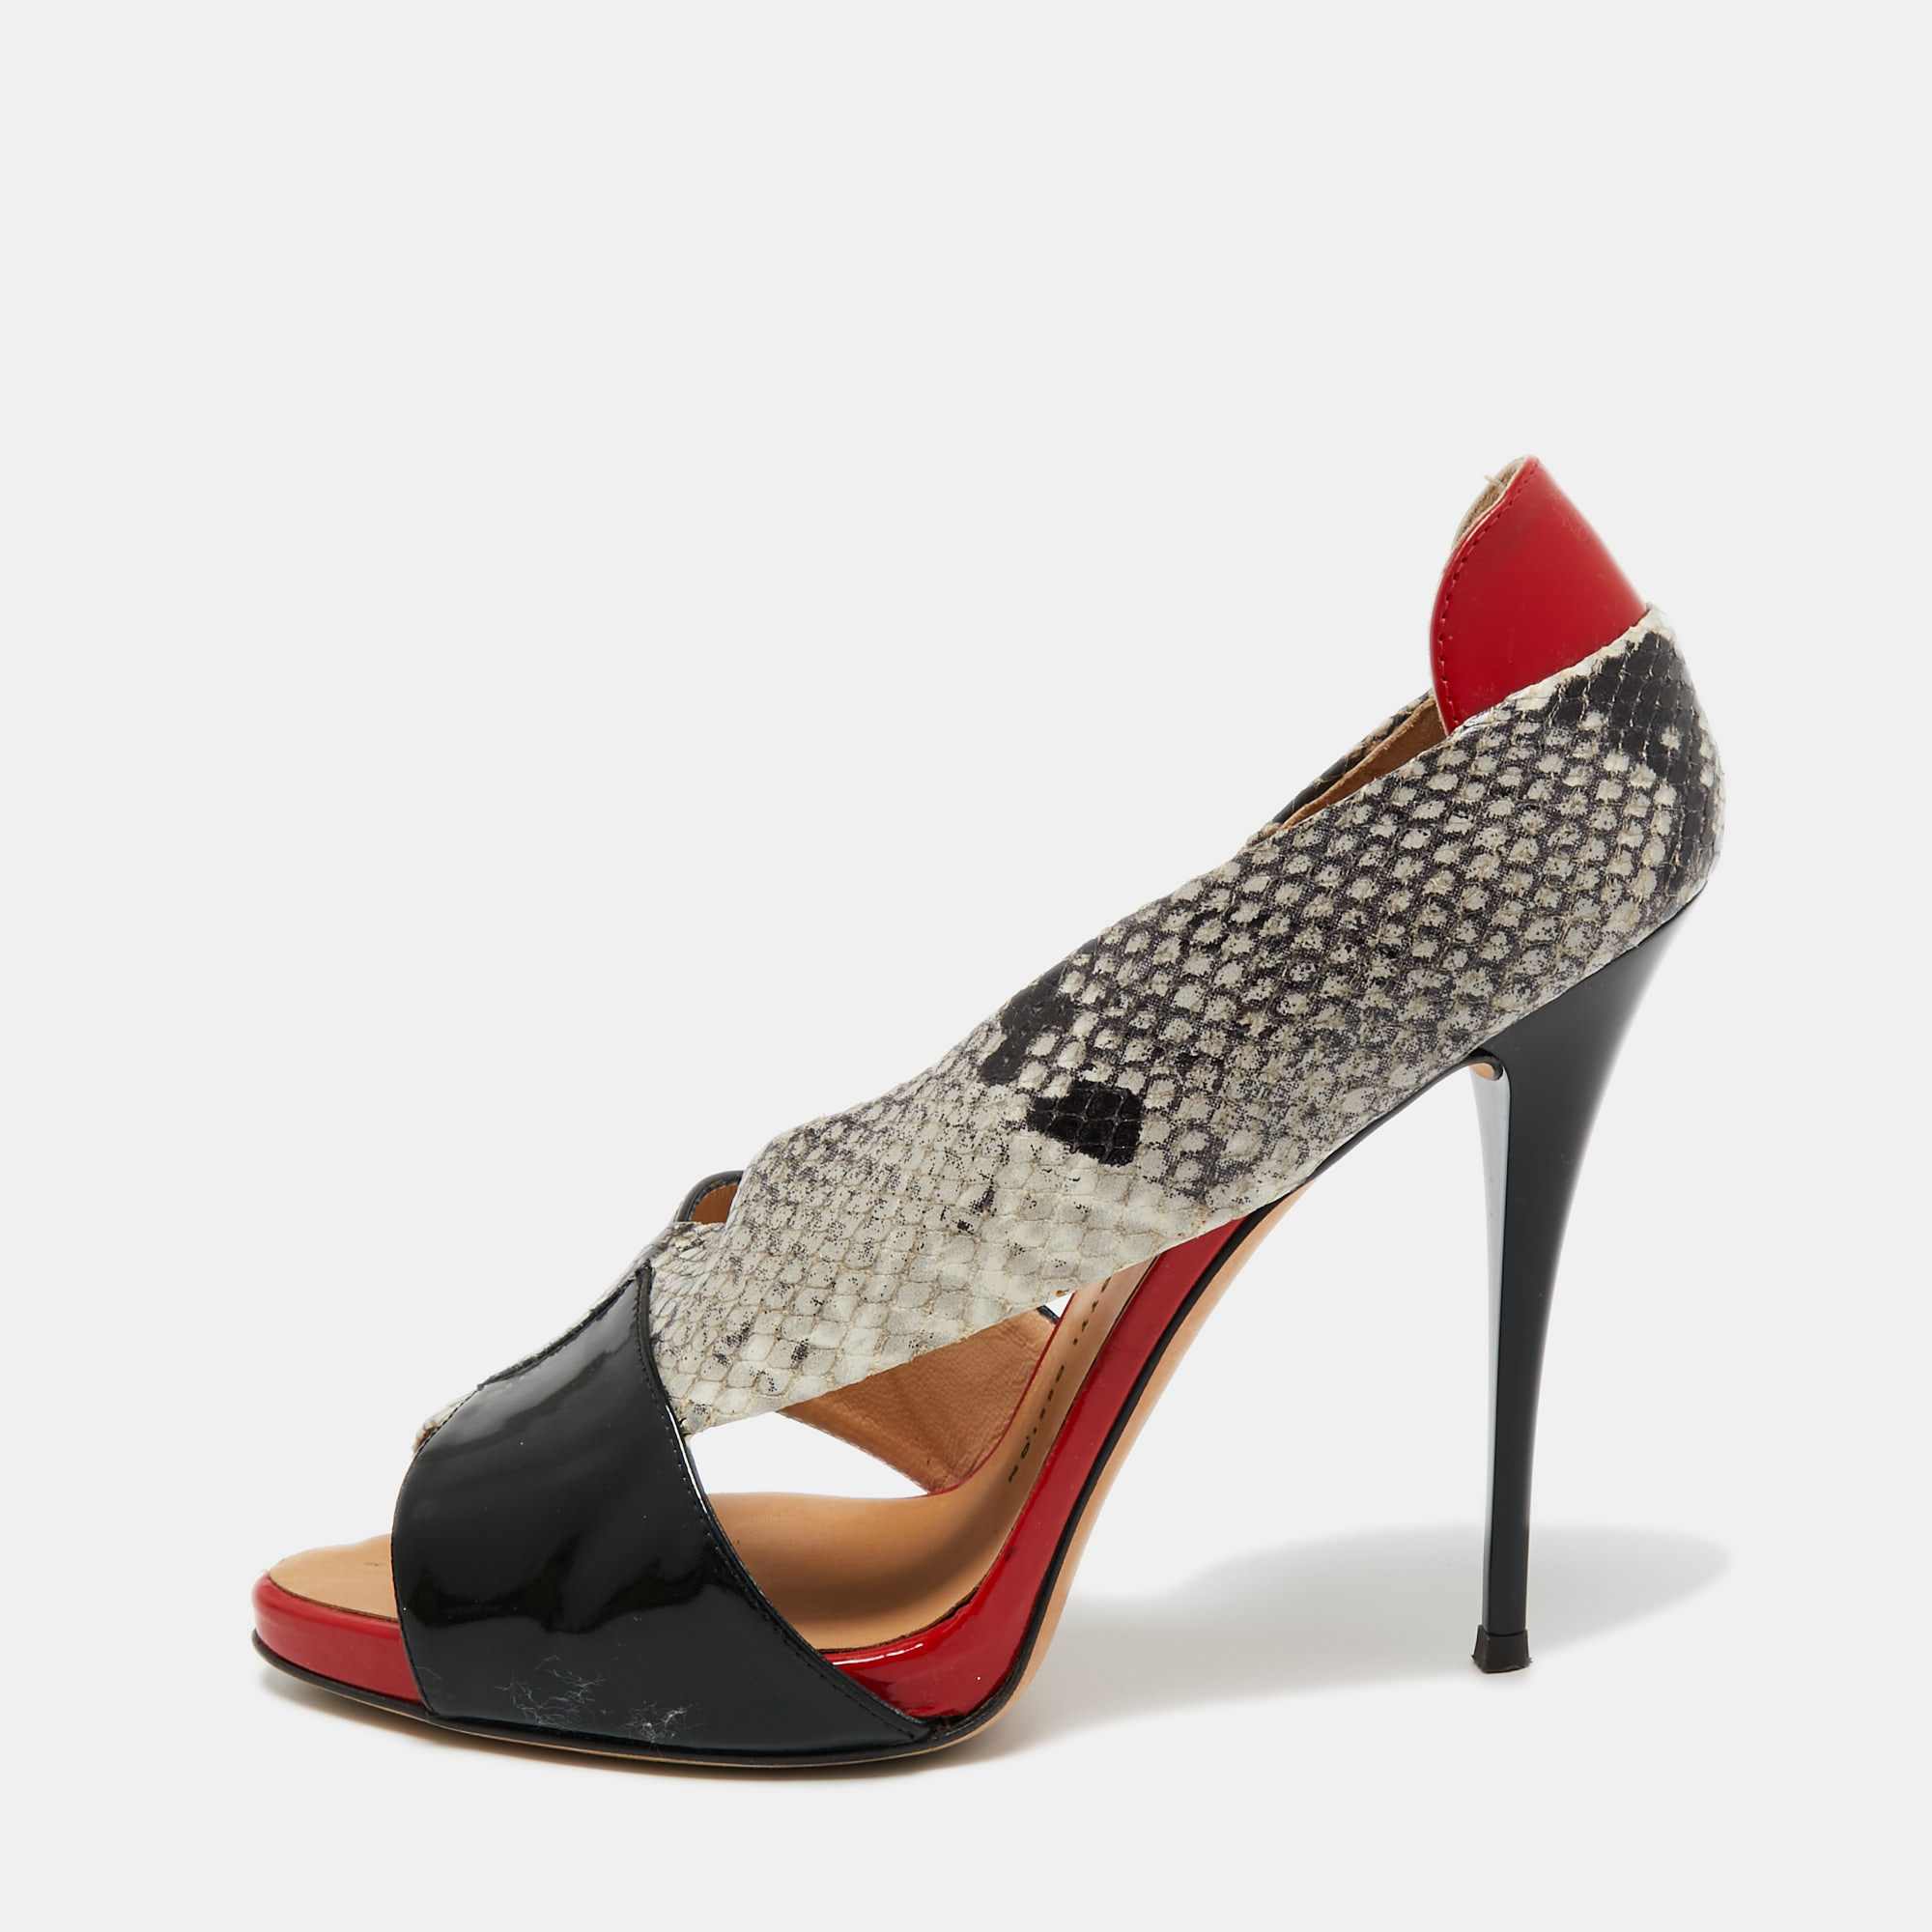 Pre-owned Giuseppe Zanotti Multicolor Python Embossed And Patent Leather D'orsay Peep Toe Pumps Size 39.5